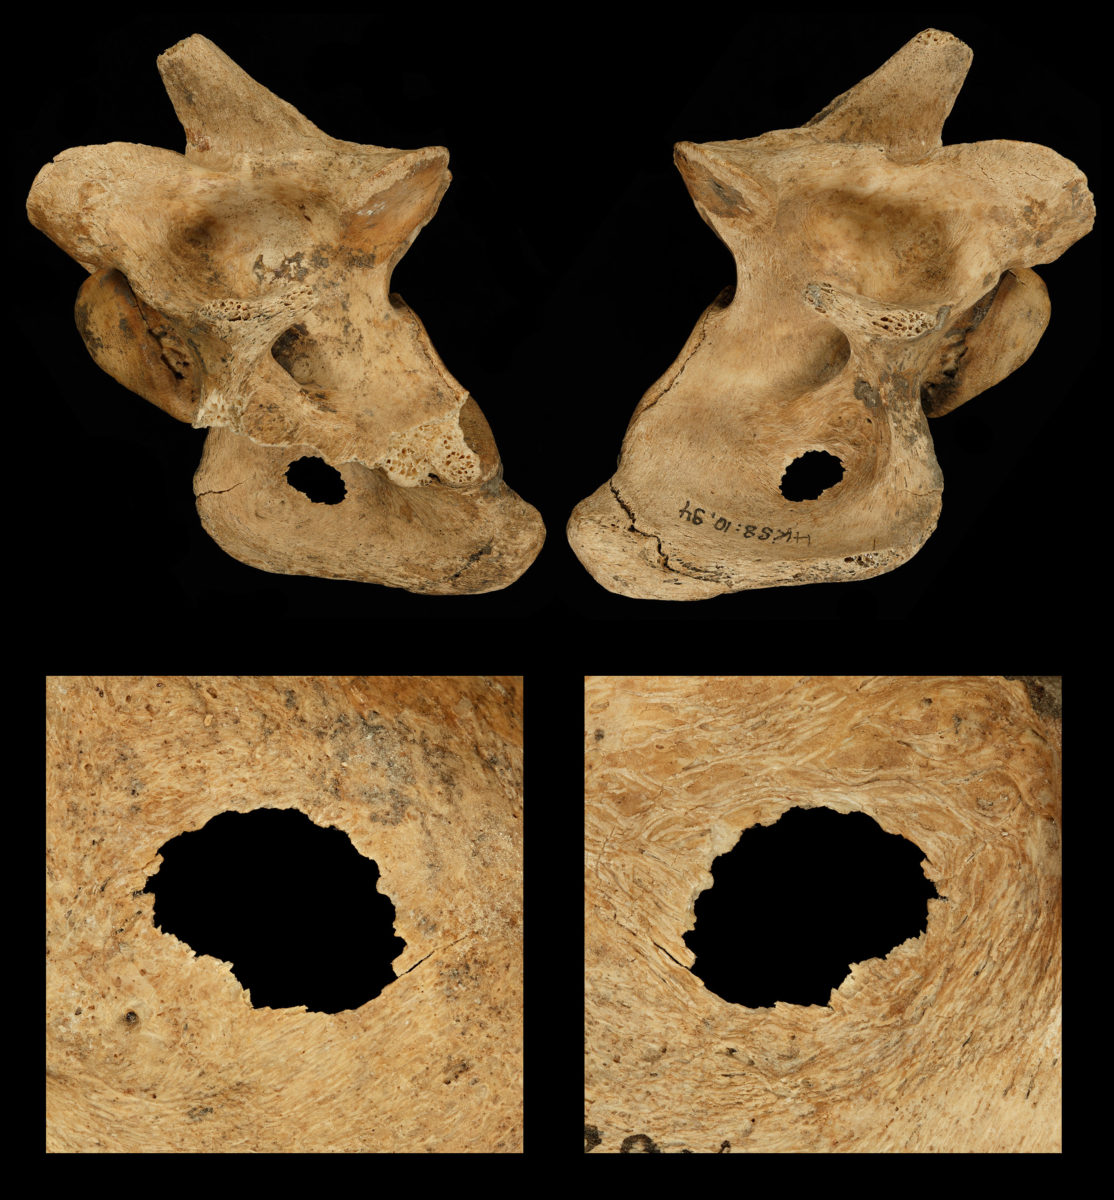 Front and back view of a hunting lesion in a cervical vertebra of an extinct fallow deer, killed by Neandertals 120.000 years ago on a lake shore close to current-day Halle (Germany). Credit: Eduard Pop, MONREPOS Archaeological Research Centre and Museum for Human Behavioural Evolution, Römisch-Germanisches Zentralmuseum, Leibniz-Researchinstitute for Archaeology.